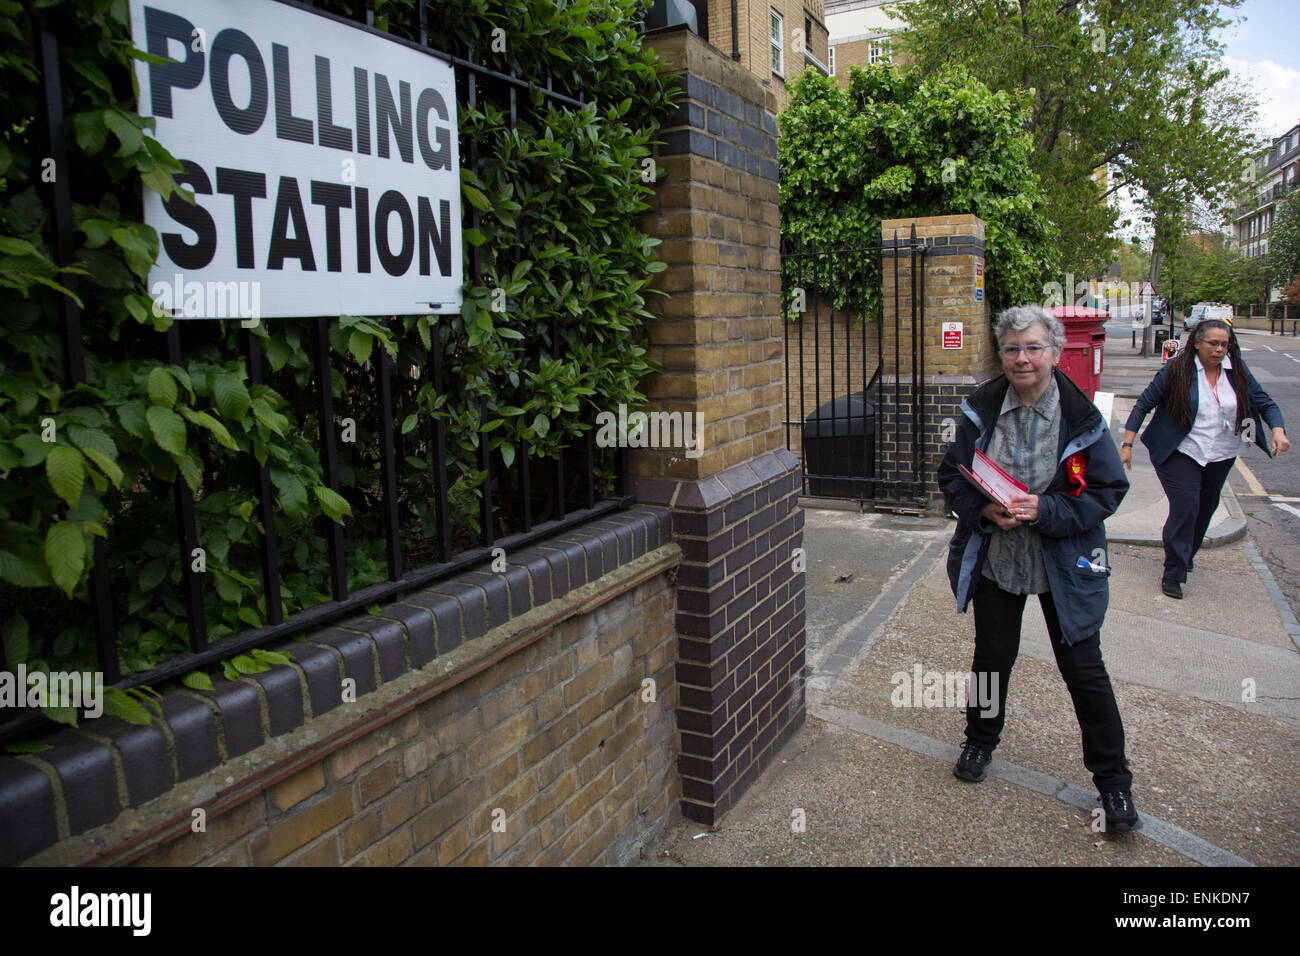 London, UK. Thursday 7th May 2015. Voters attending a polling station at St Peter's London Docks Primary School in the constituency of  Poplar and Limehouse in East London on the day of the general election. This is a Labour Party seat, although this electin is set to be one of the most hotly contested in a generation. Stock Photo